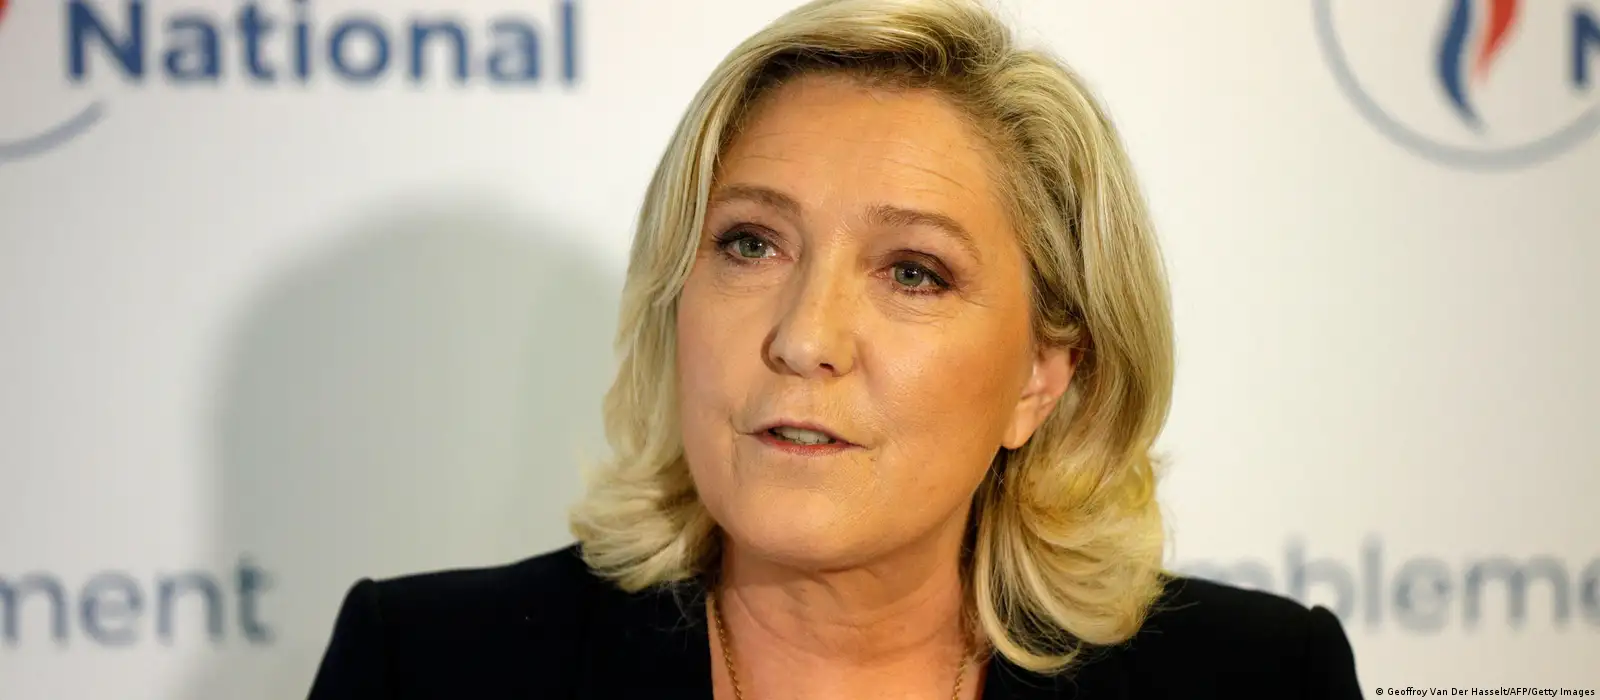 Marine Le Pen acquitted in hate speech trial – DW – 05/04/2021